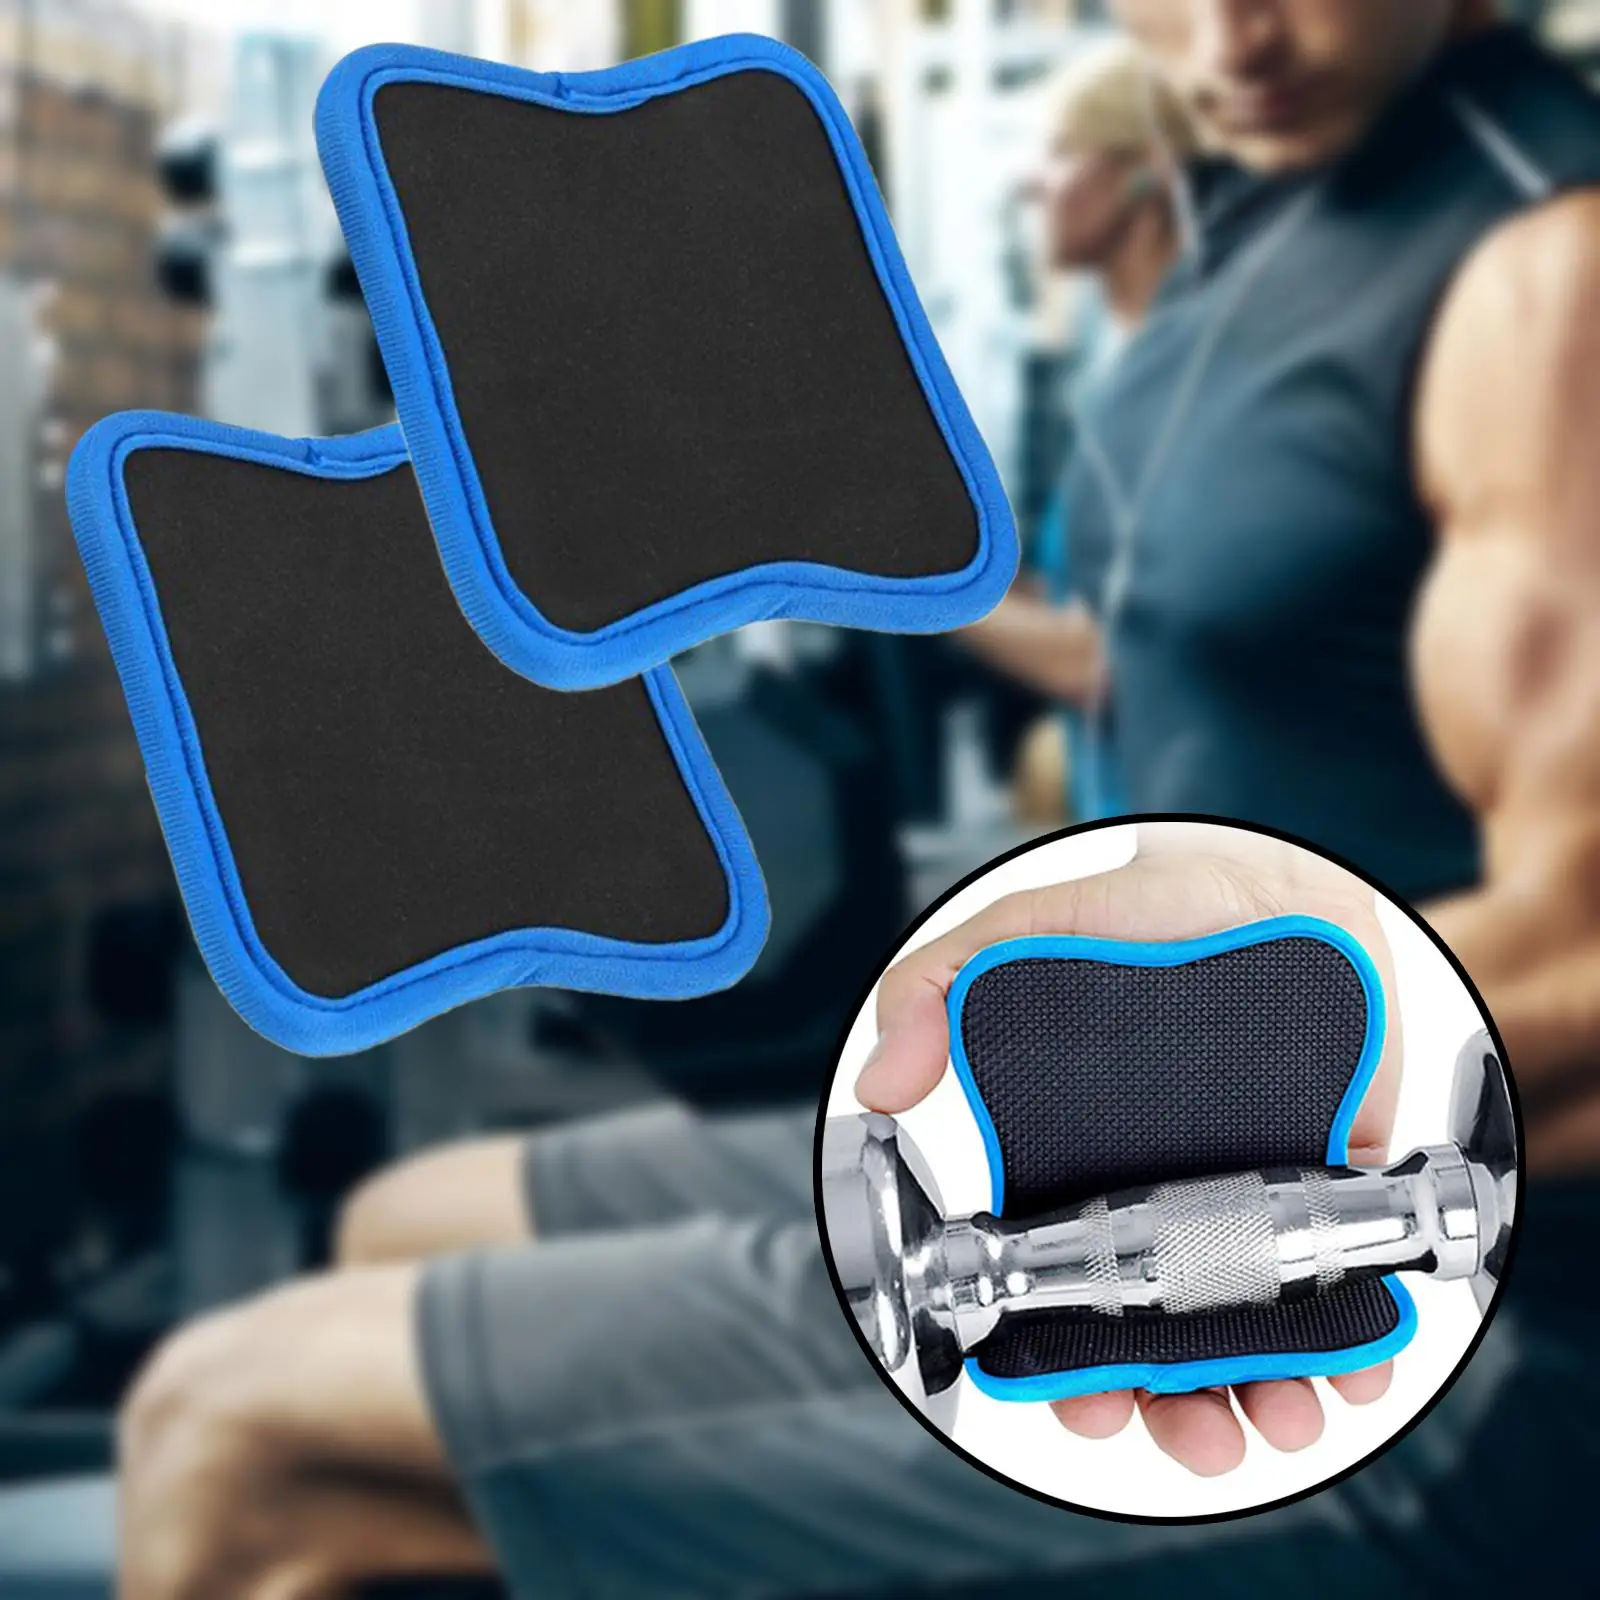 2 Pieces Gym Grip Pads No Sweaty Hands Protector Workout Pads Pull up Comfort for Dumbbell Fitness Sports Training Women Men